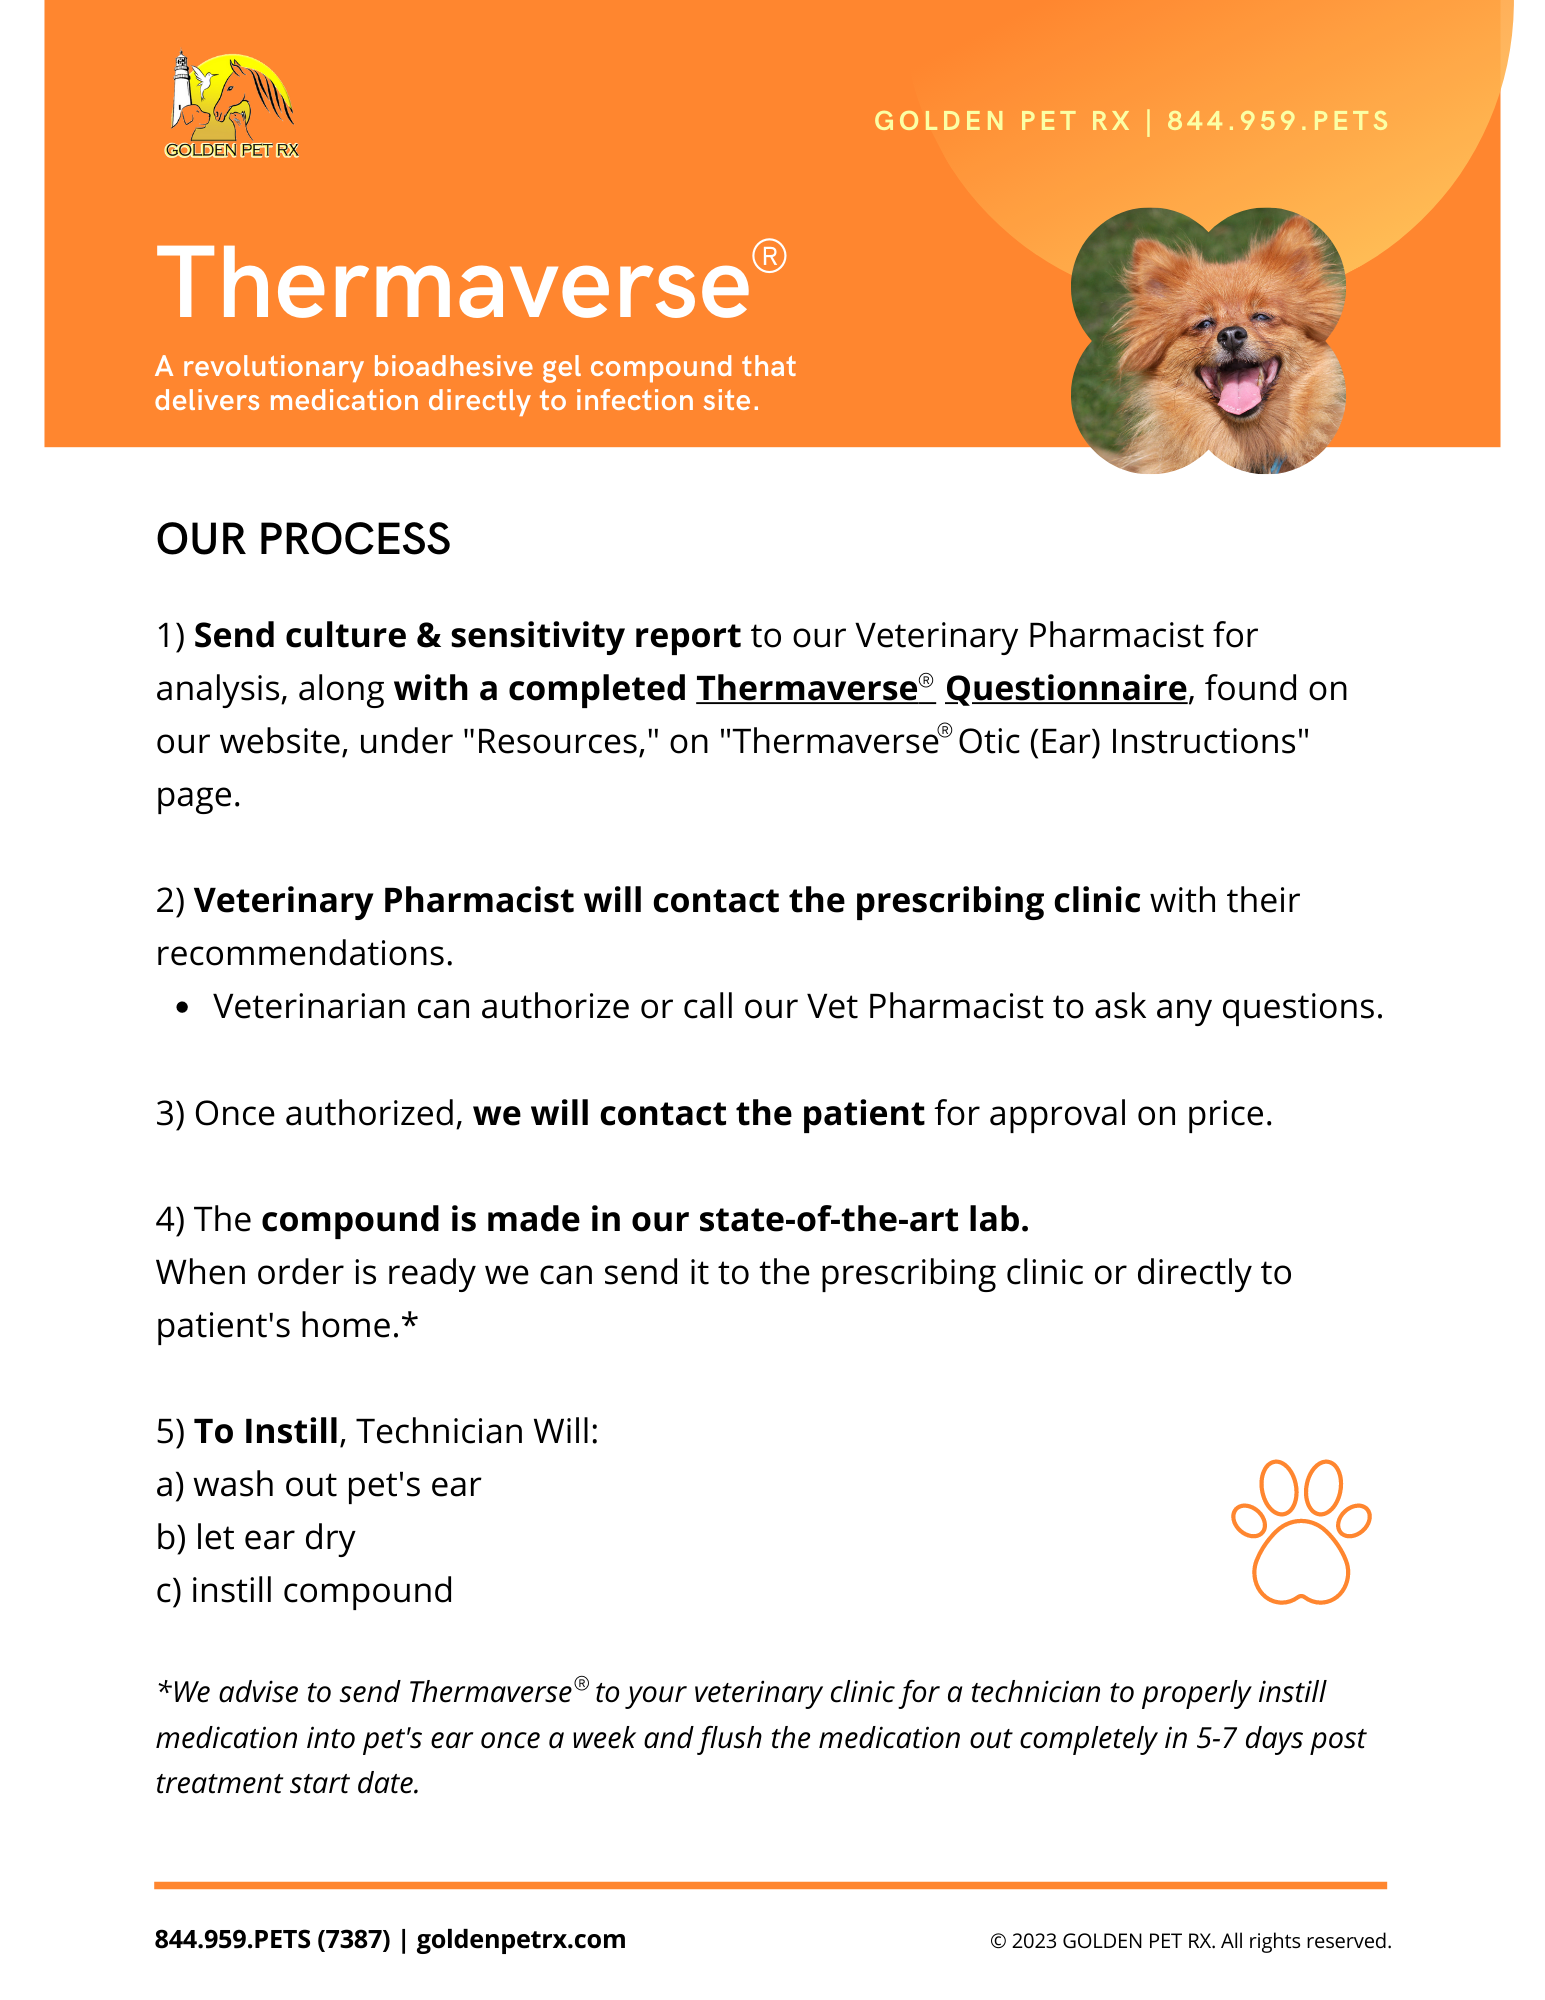 v7.thermaverse.the.process.p2.png